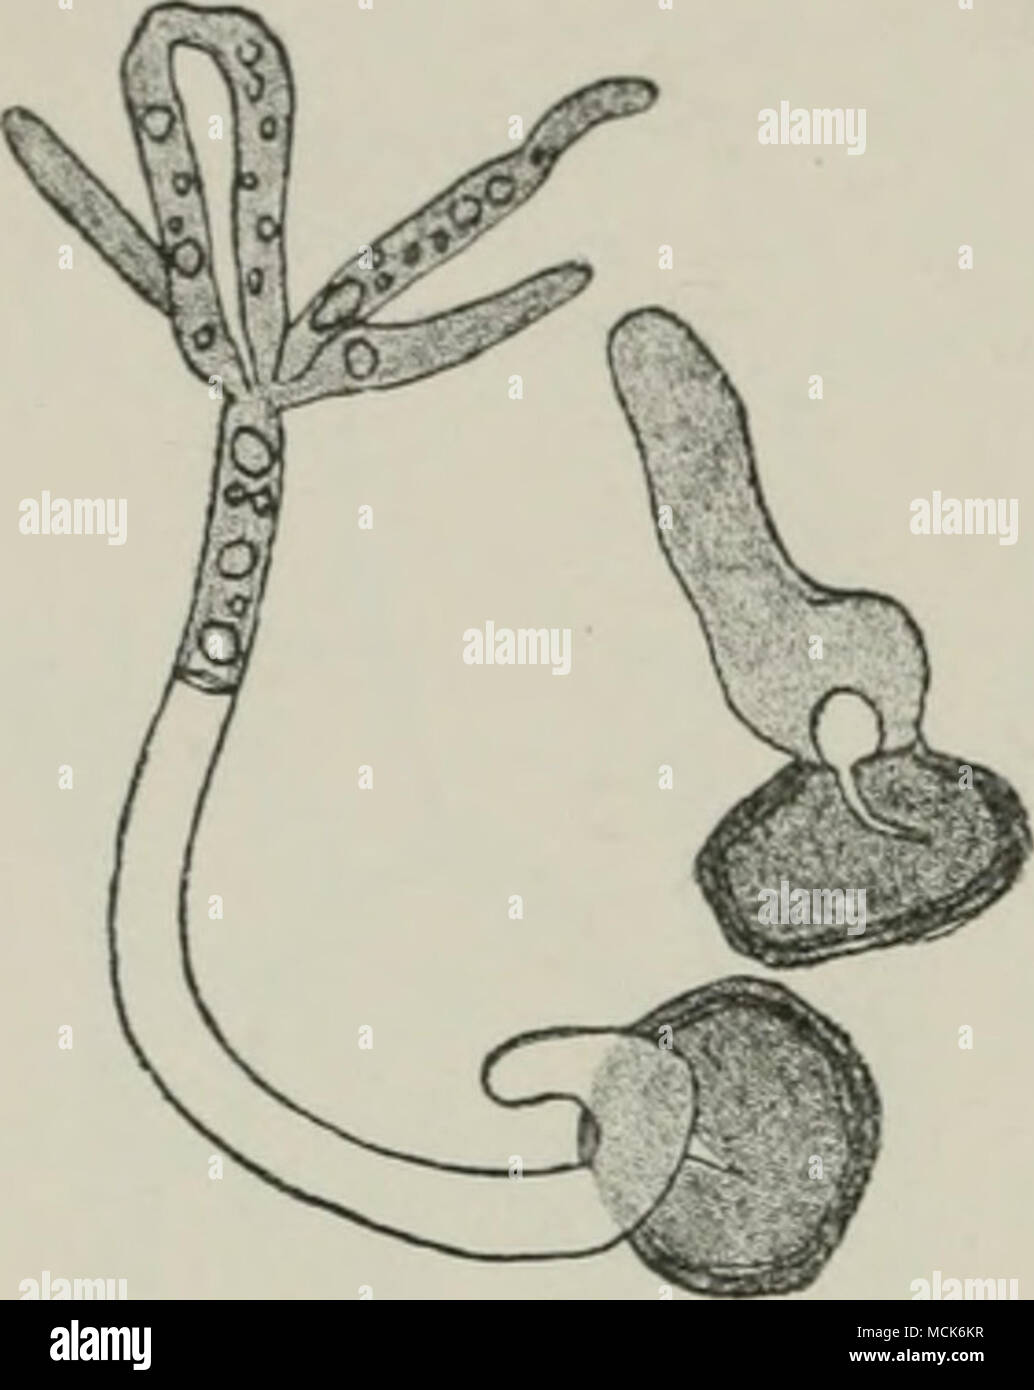 . Fig. 171.—Mtladotoxnivi,i endor/enum. Germinating spores. Cue has already produced a promycelium with a whorl of five branches, of which two have fused. (After Woronin.) Urocystis. Spores massed into balls, consisting of several spores sur- rounded by smaller companion-cells incapable of germination. The central spores are clearly distinguished from the others by their larger size, darker colour, and thicker coat. The balls of spores are developed inside coils of hyphae, which become entwined together and swell up in a gelatinous manner. The central spores on germination give rise to a promy Stock Photo